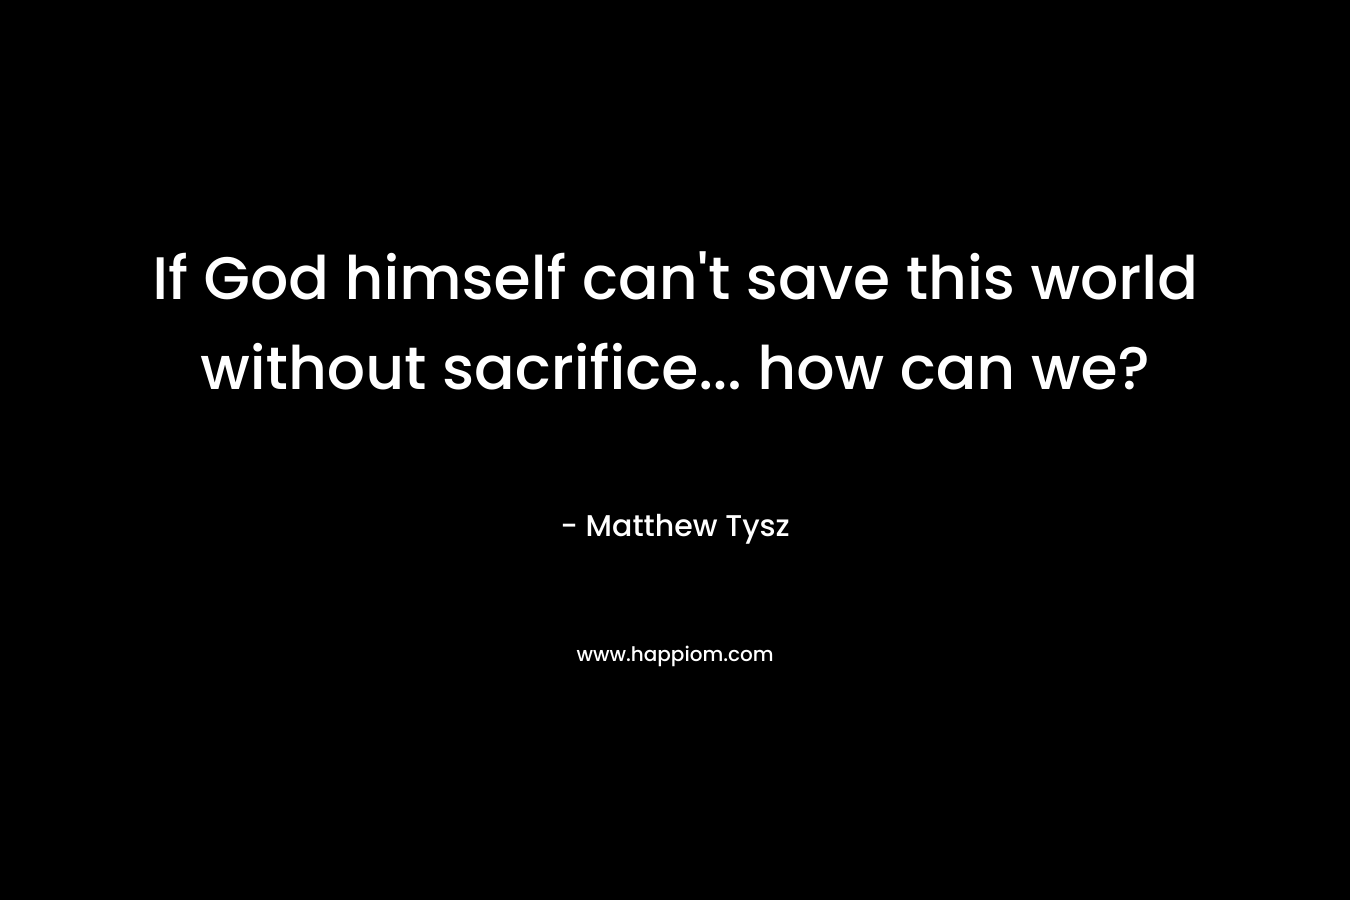 If God himself can't save this world without sacrifice... how can we?